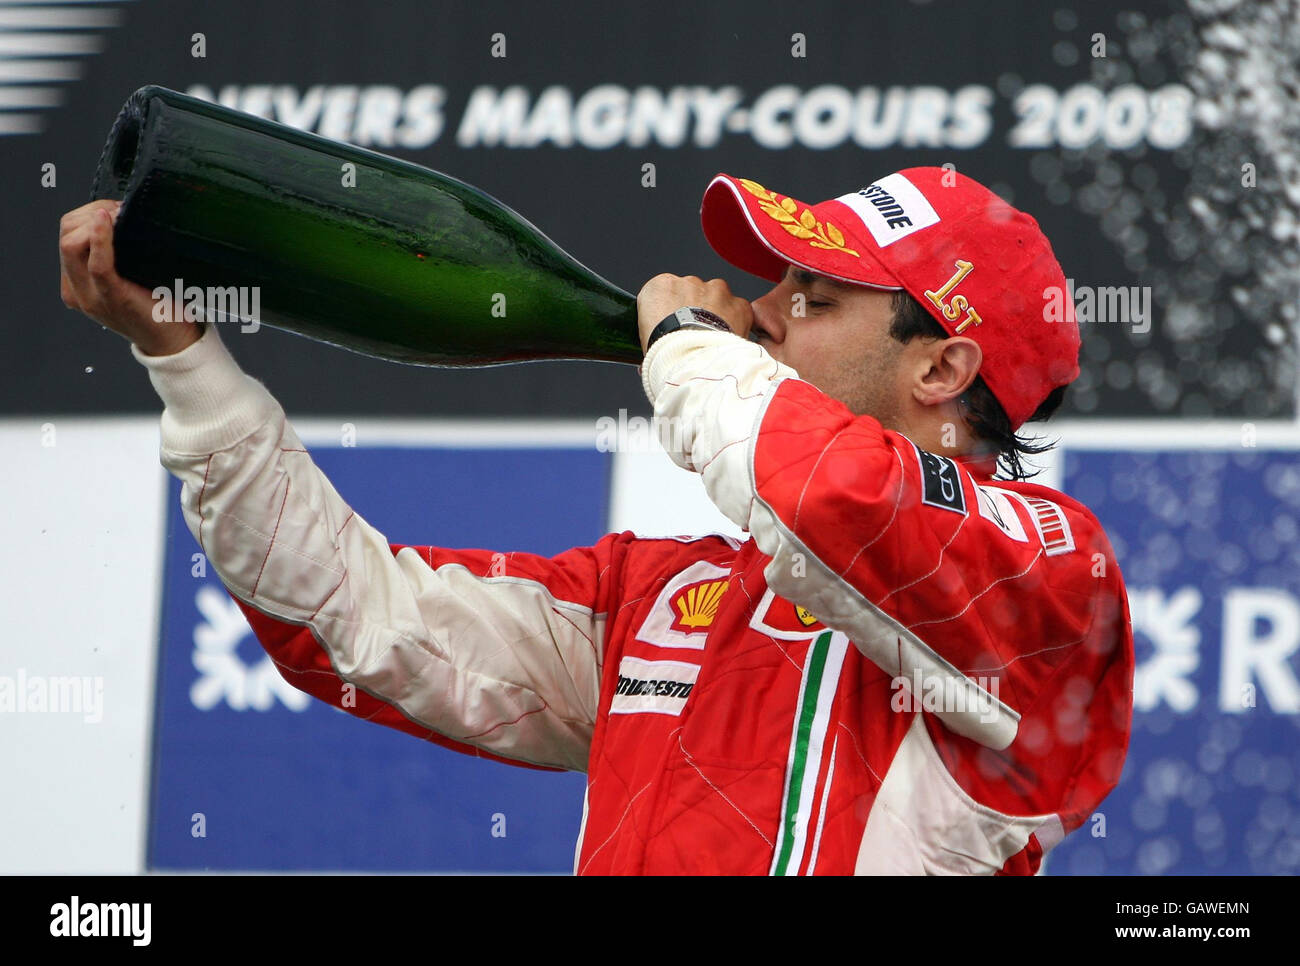 Formula One Motor Racing - French Grand Prix - Race - Magny Cours. Ferrari's Felipe Massa celebrates his victory during the Grand Prix at Magny-Cours, Nevers, France. Stock Photo